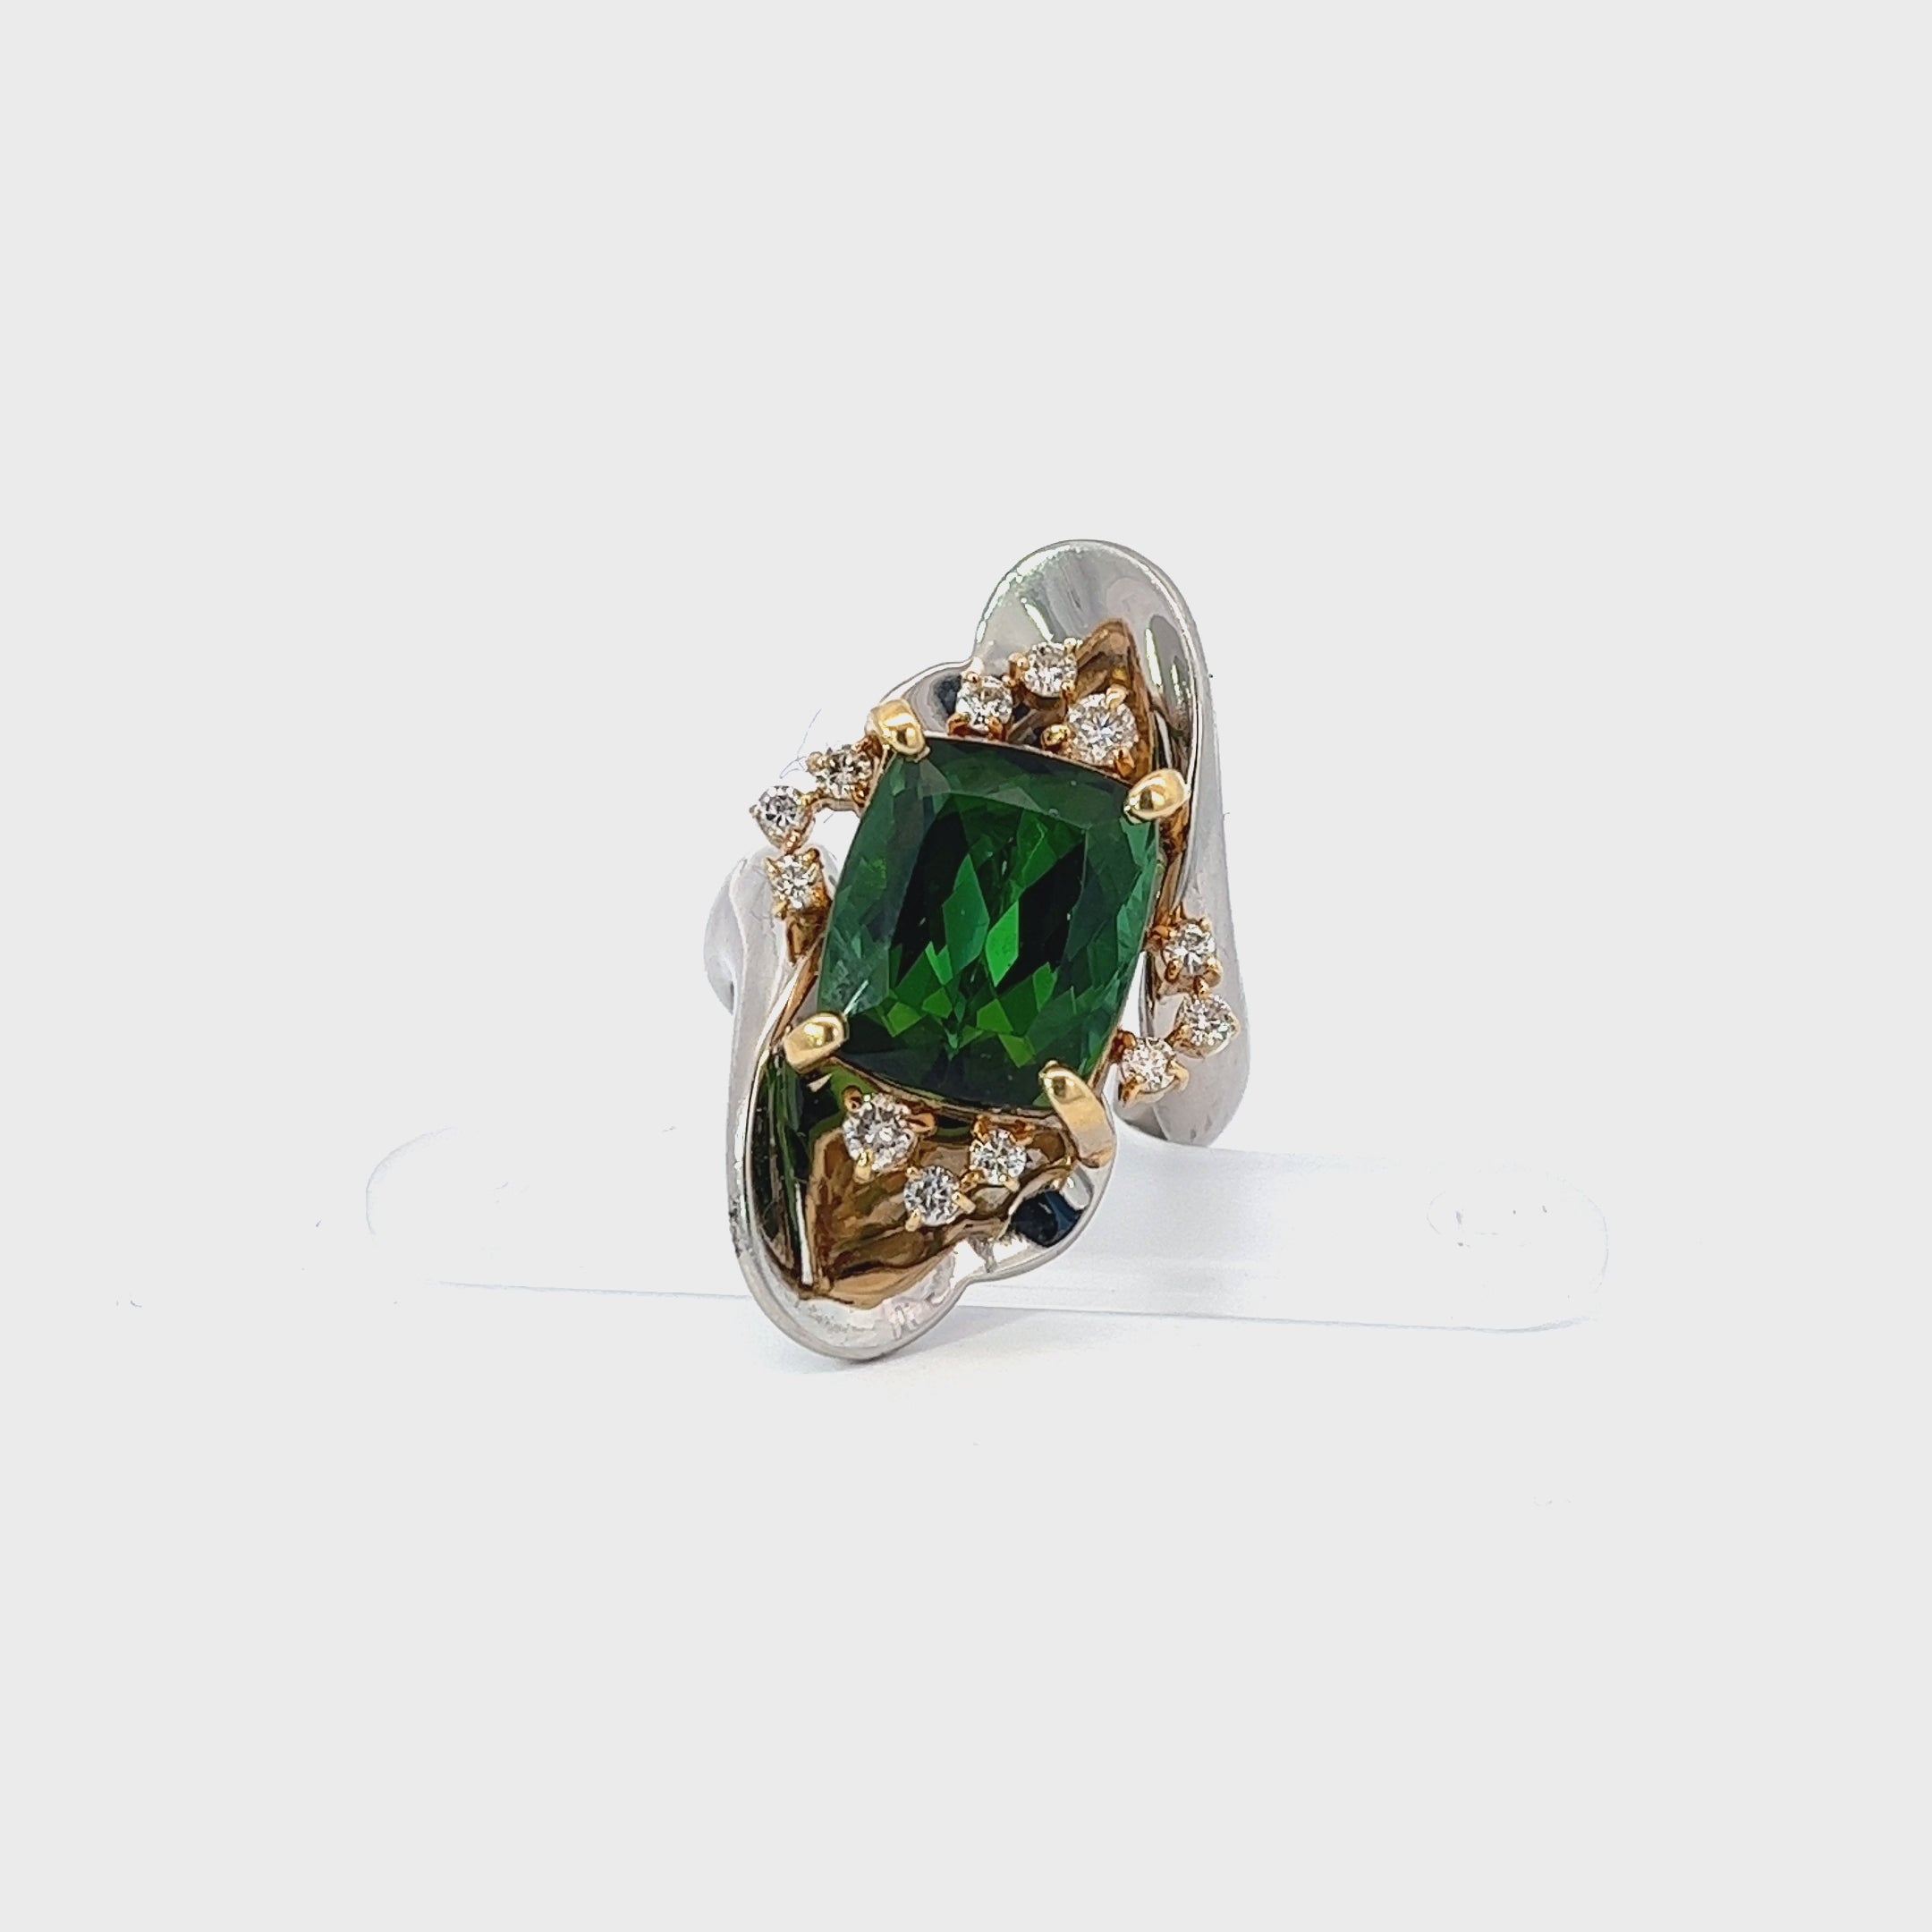 PLATINUM AND 18K YELLOW GOLD 7.80CT GREEN TOURMALINE AND .38CT E VS2 LOVE PEDALS RING GIA CERITIED